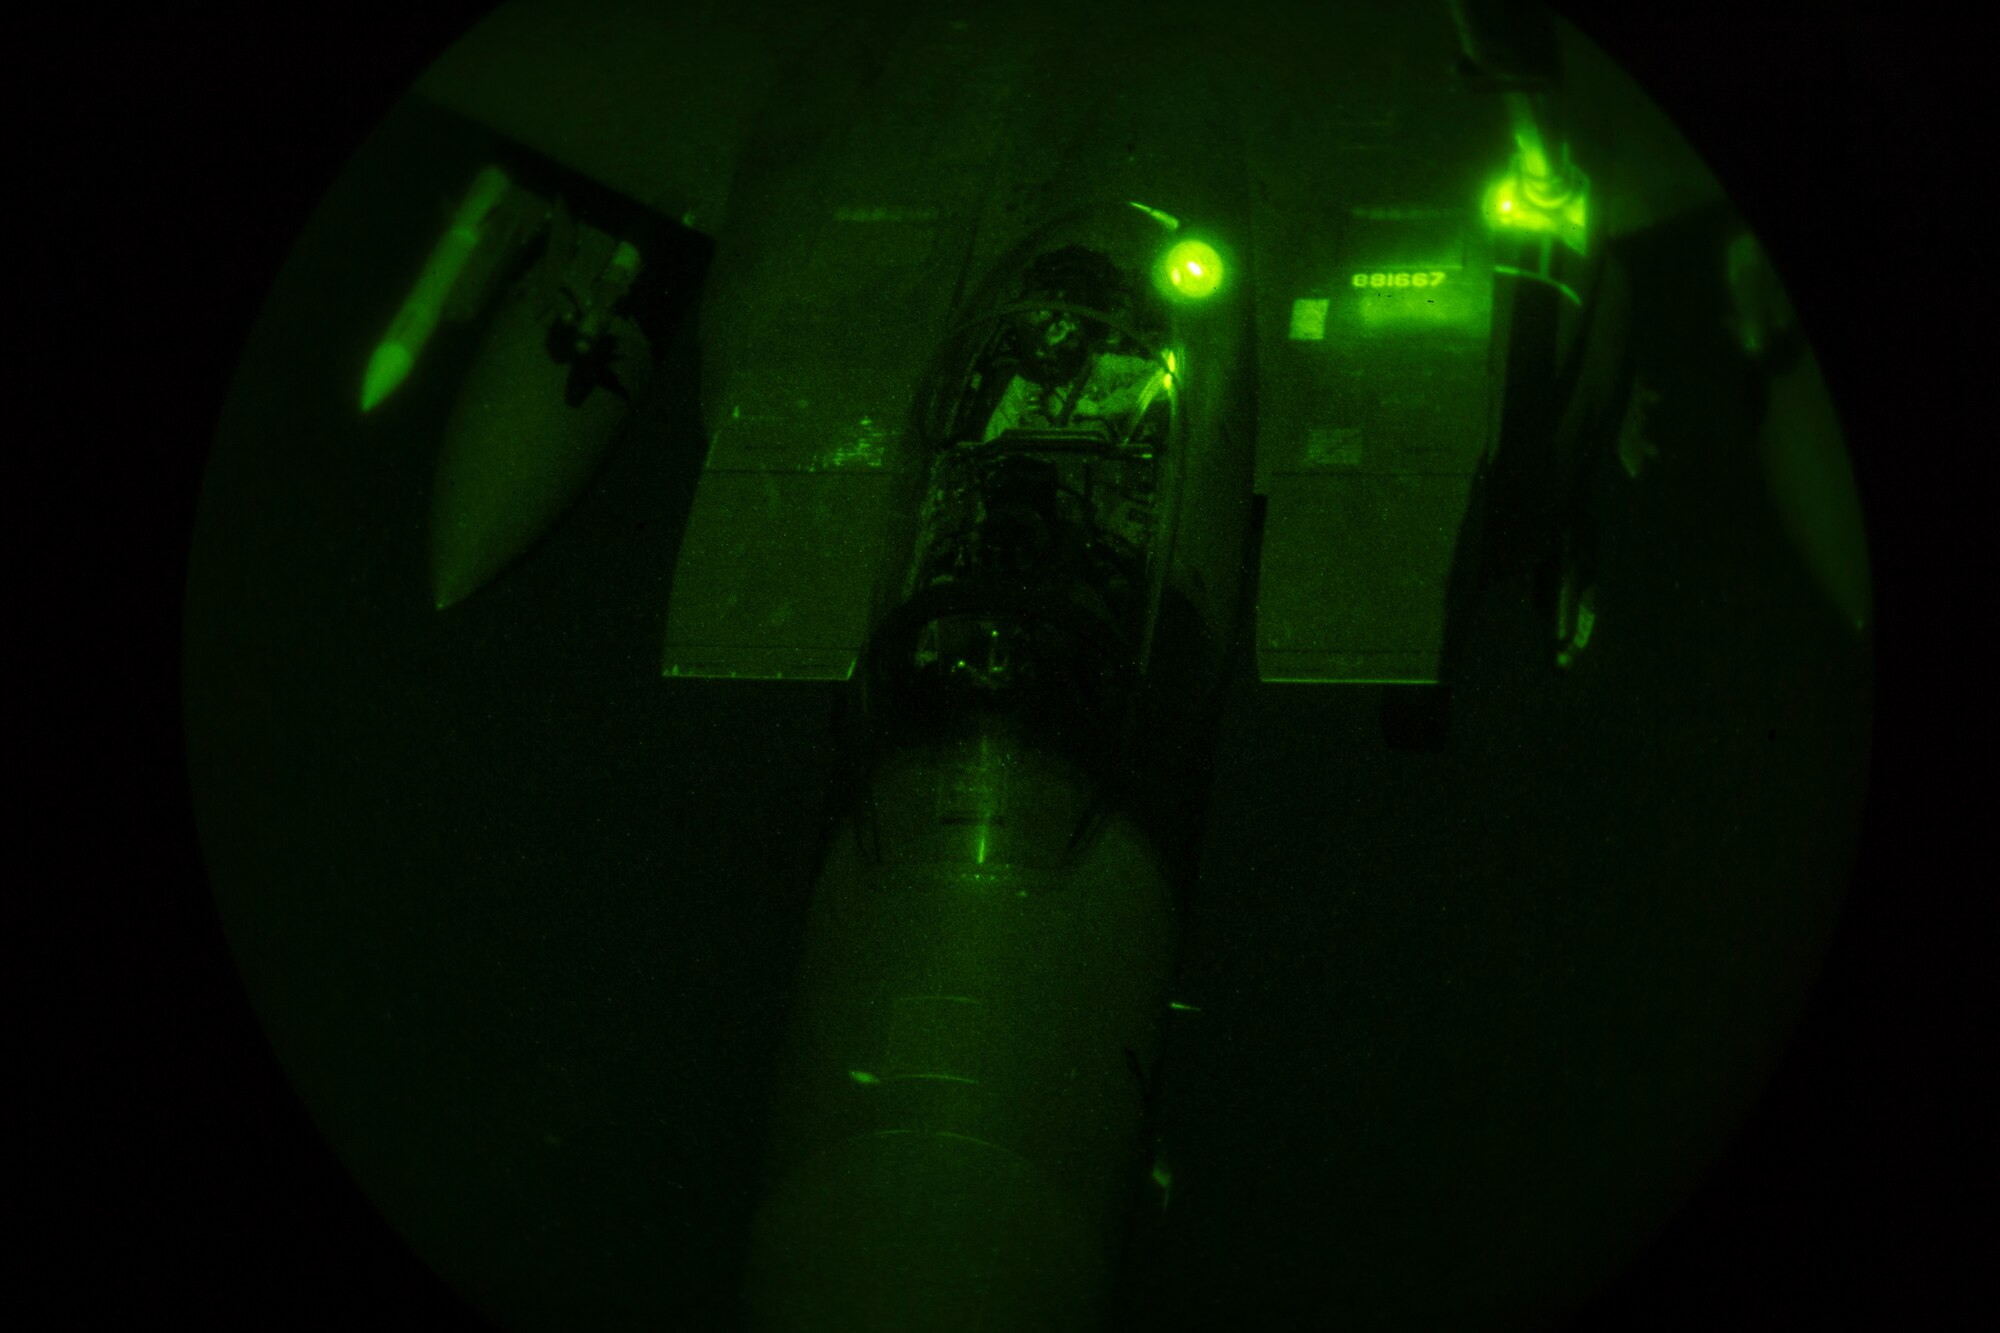 A U.S. Air Force KC-10 Extender assigned to the 908th Expeditionary Air Refueling Squadron refuels a U.S. Air Force F-15 Strike Eagle assigned to 494th Expeditionary Fighter Squadron above the U.S. Central Command area of responsibility, Jan. 11, 2020.